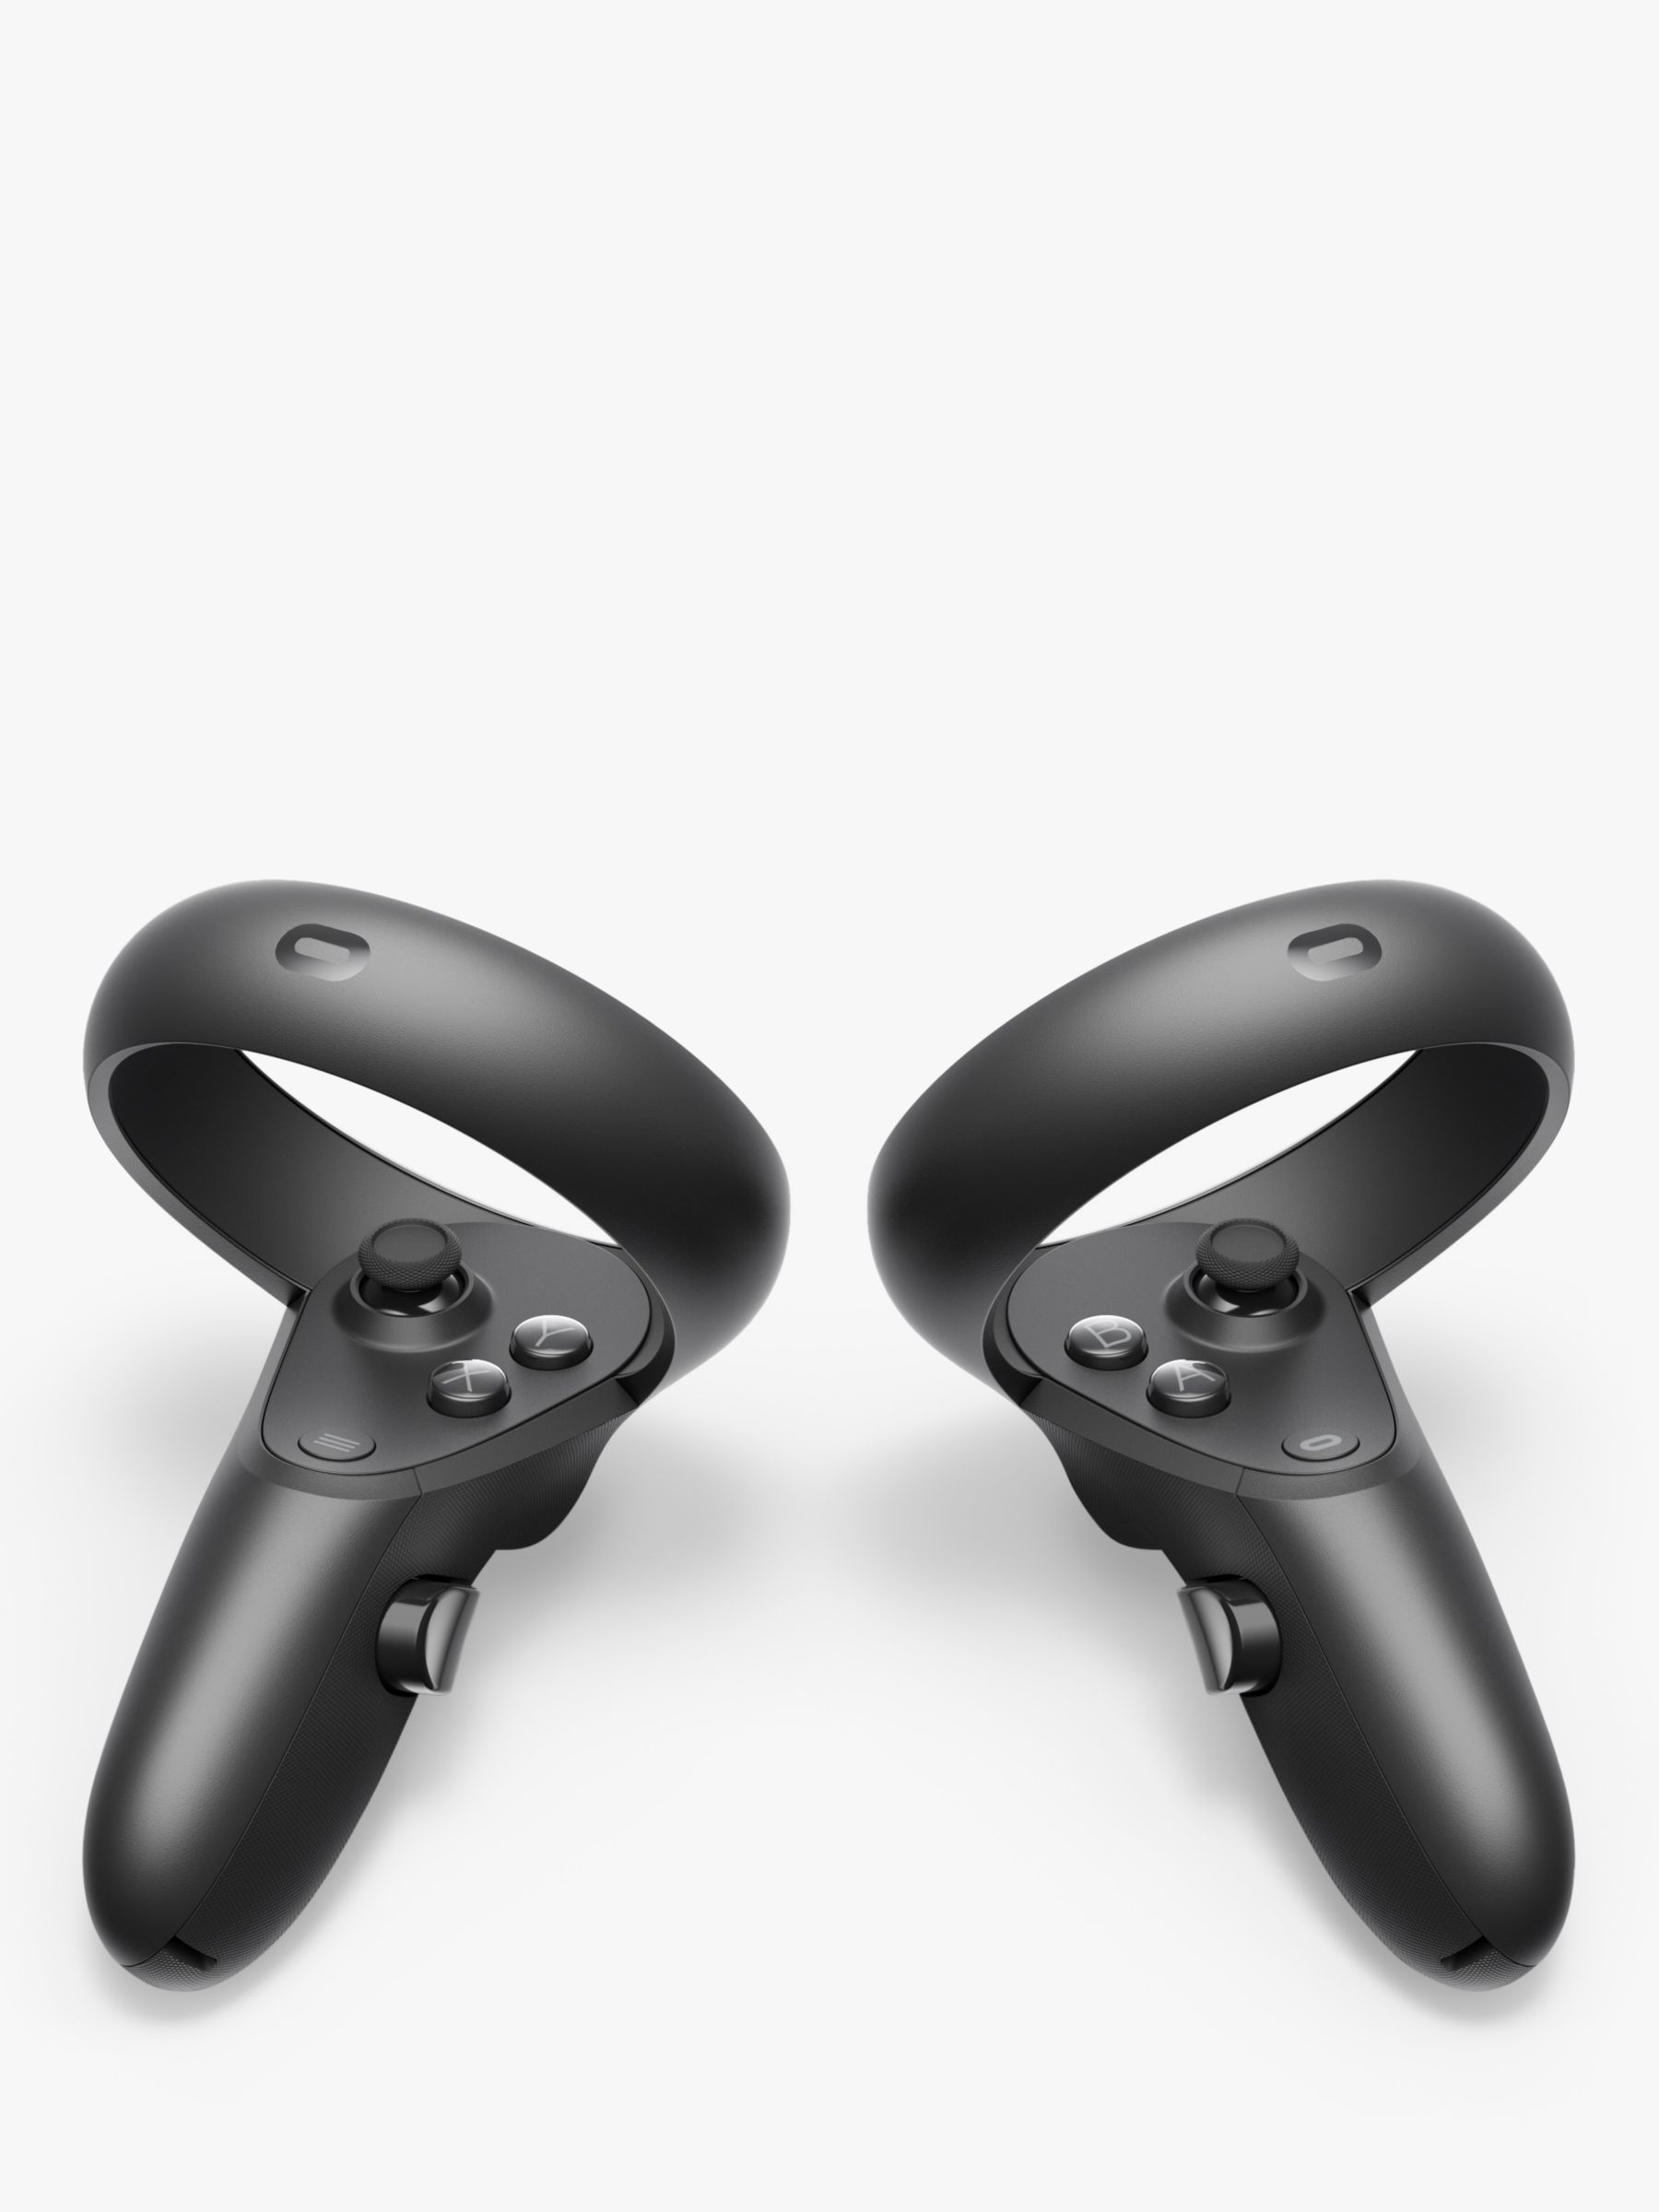 oculus vr headset with controllers